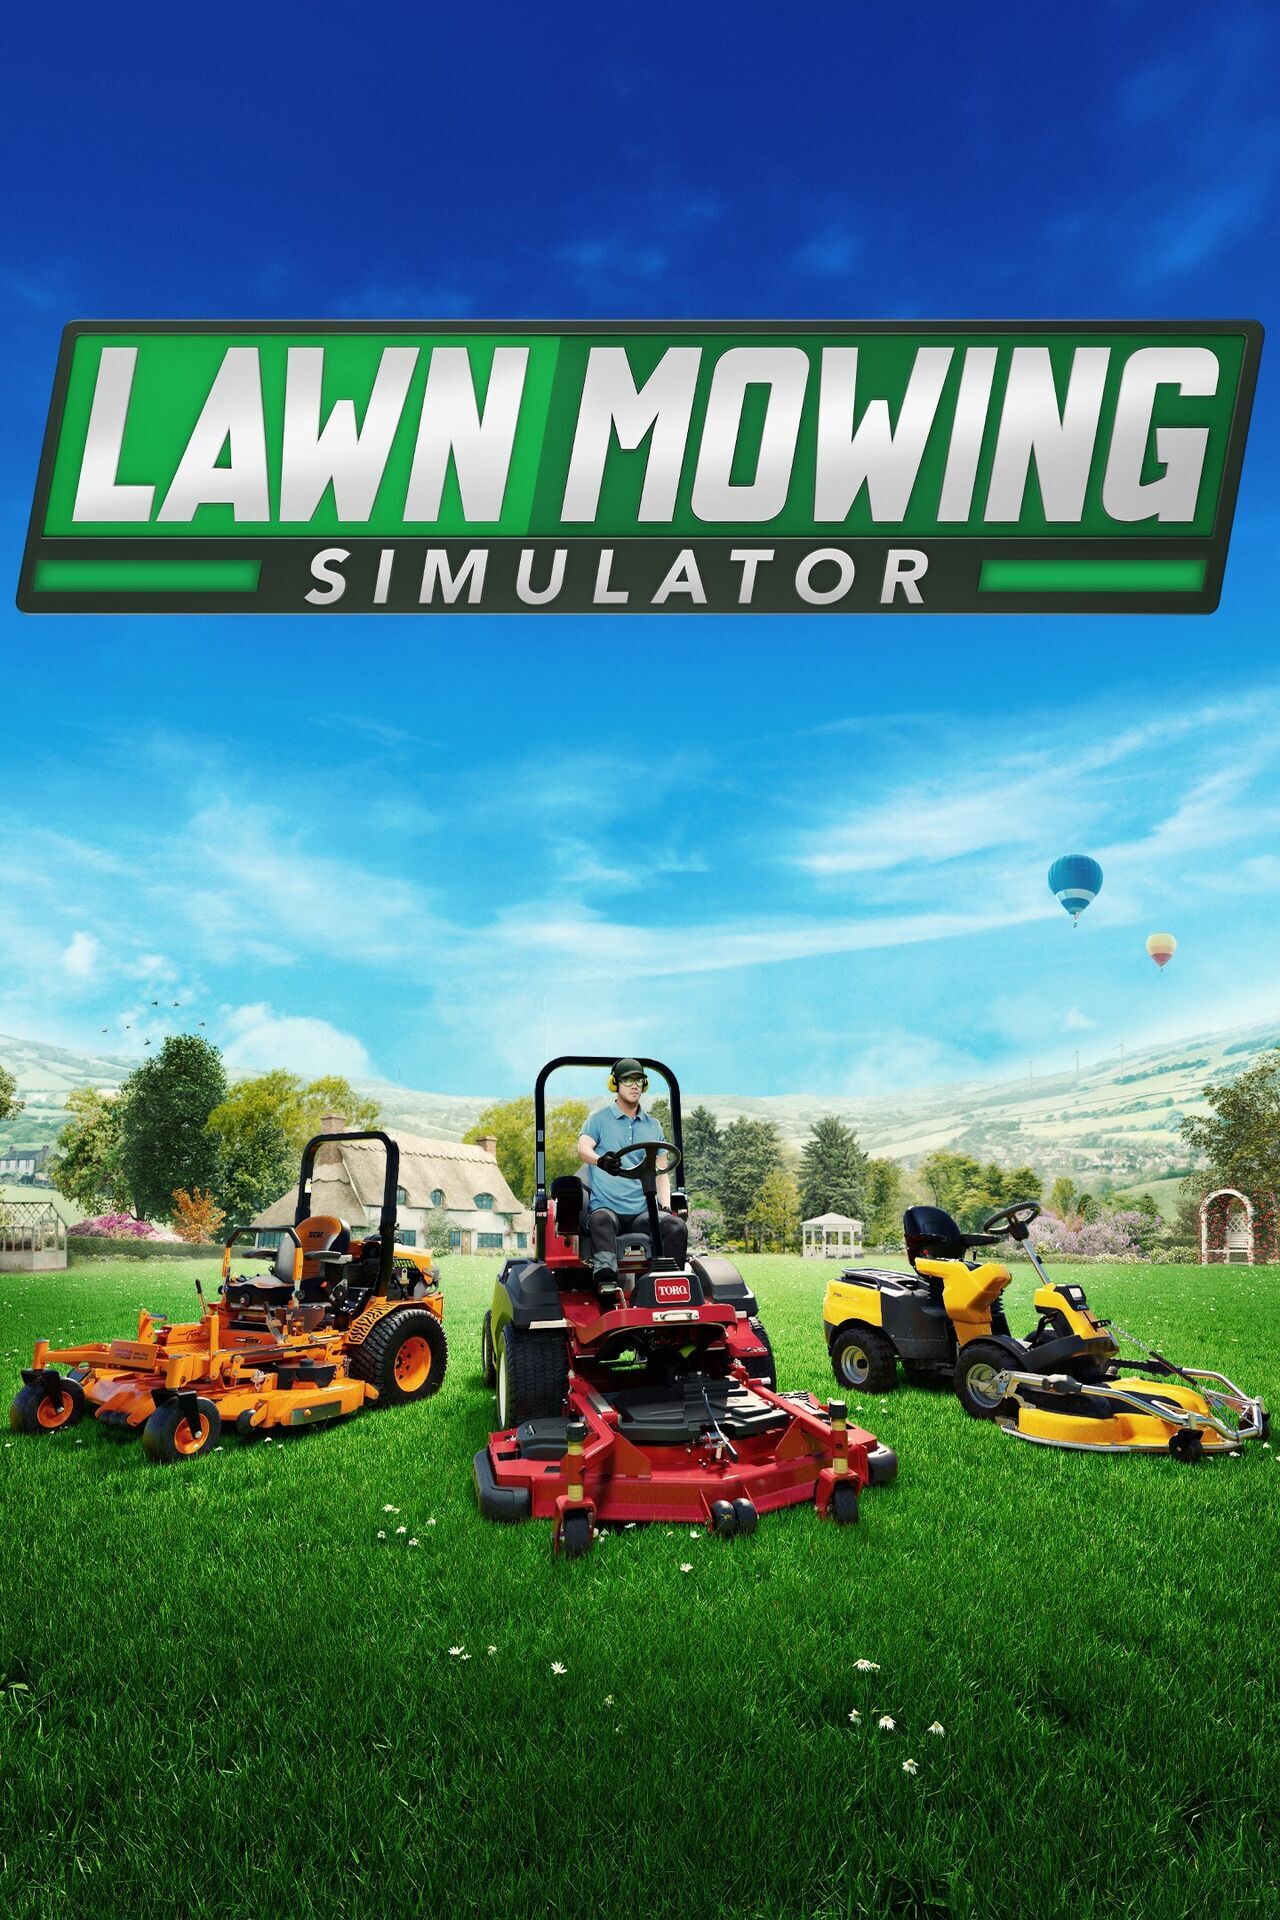 lawn-mowing-simulator-videojuego-pc-ps4-ps5-xbox-series-x-s-y